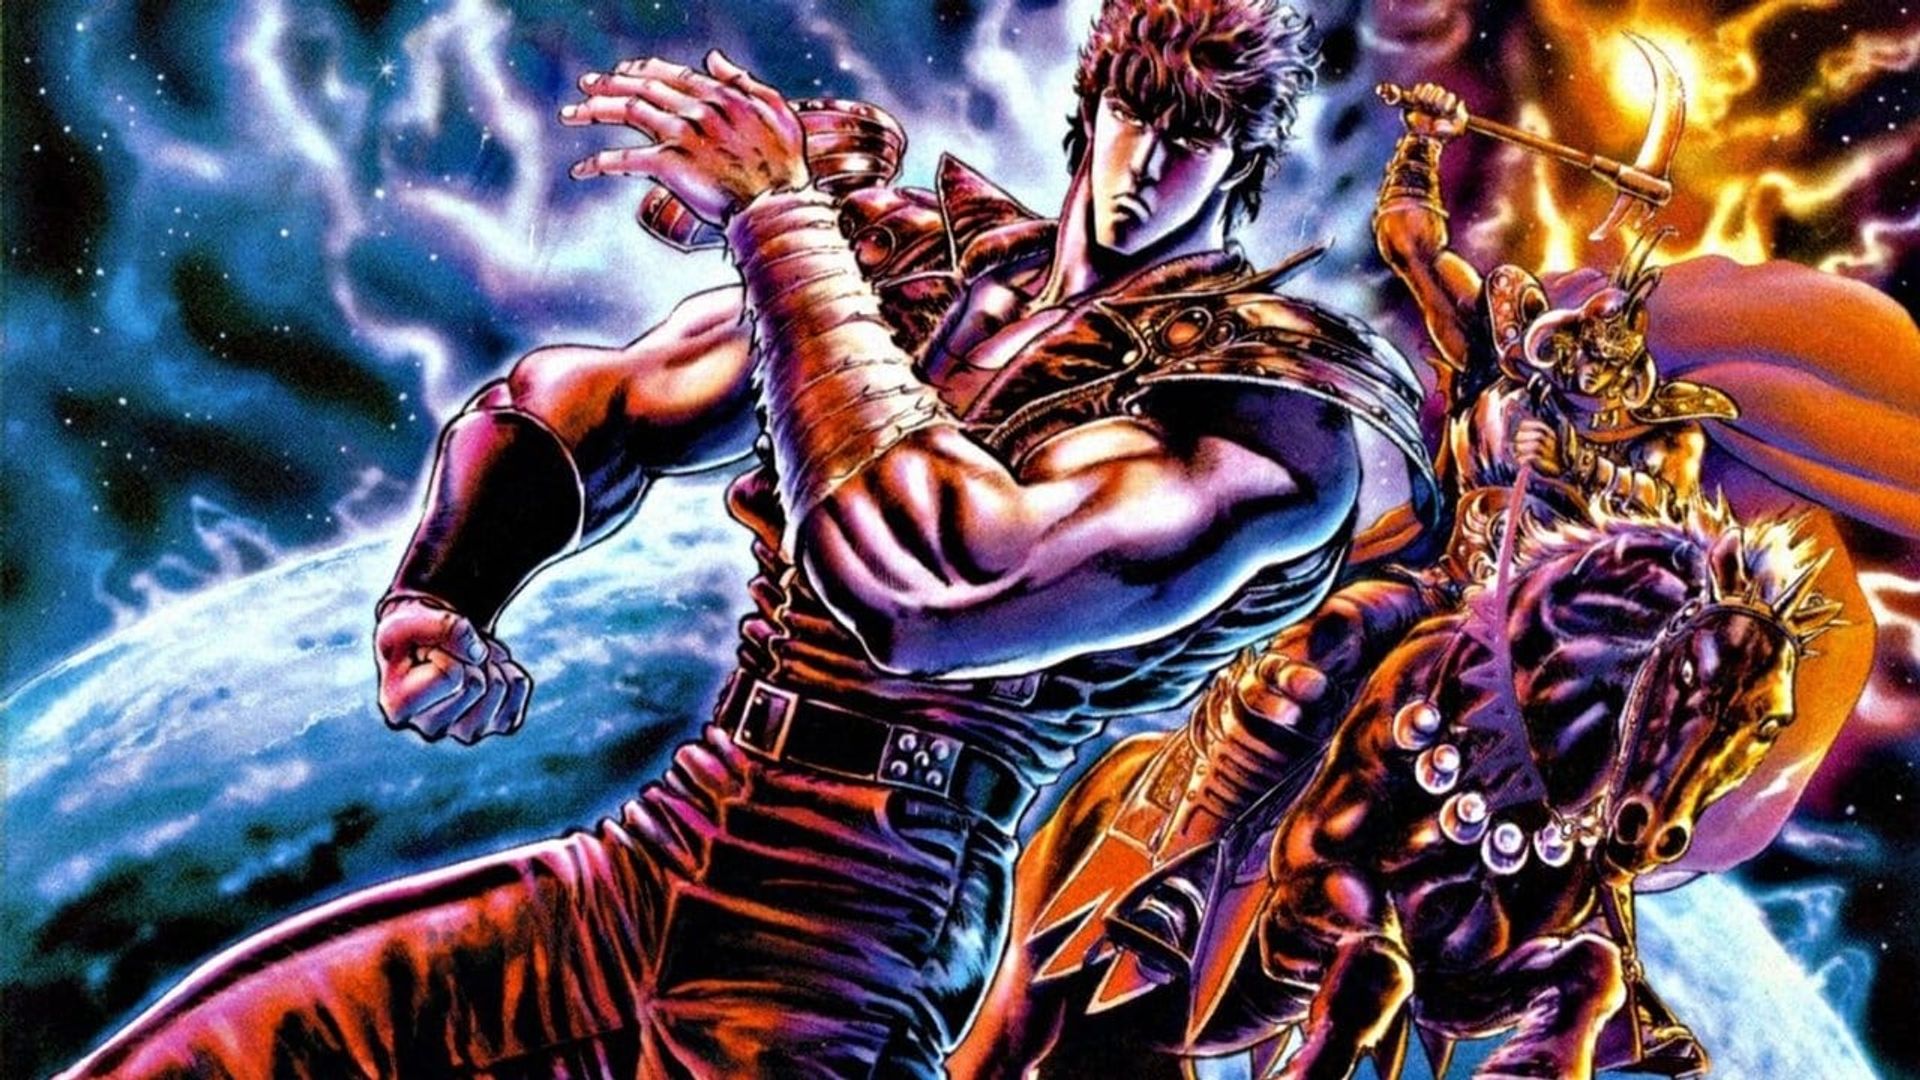 Fist of the North Star background